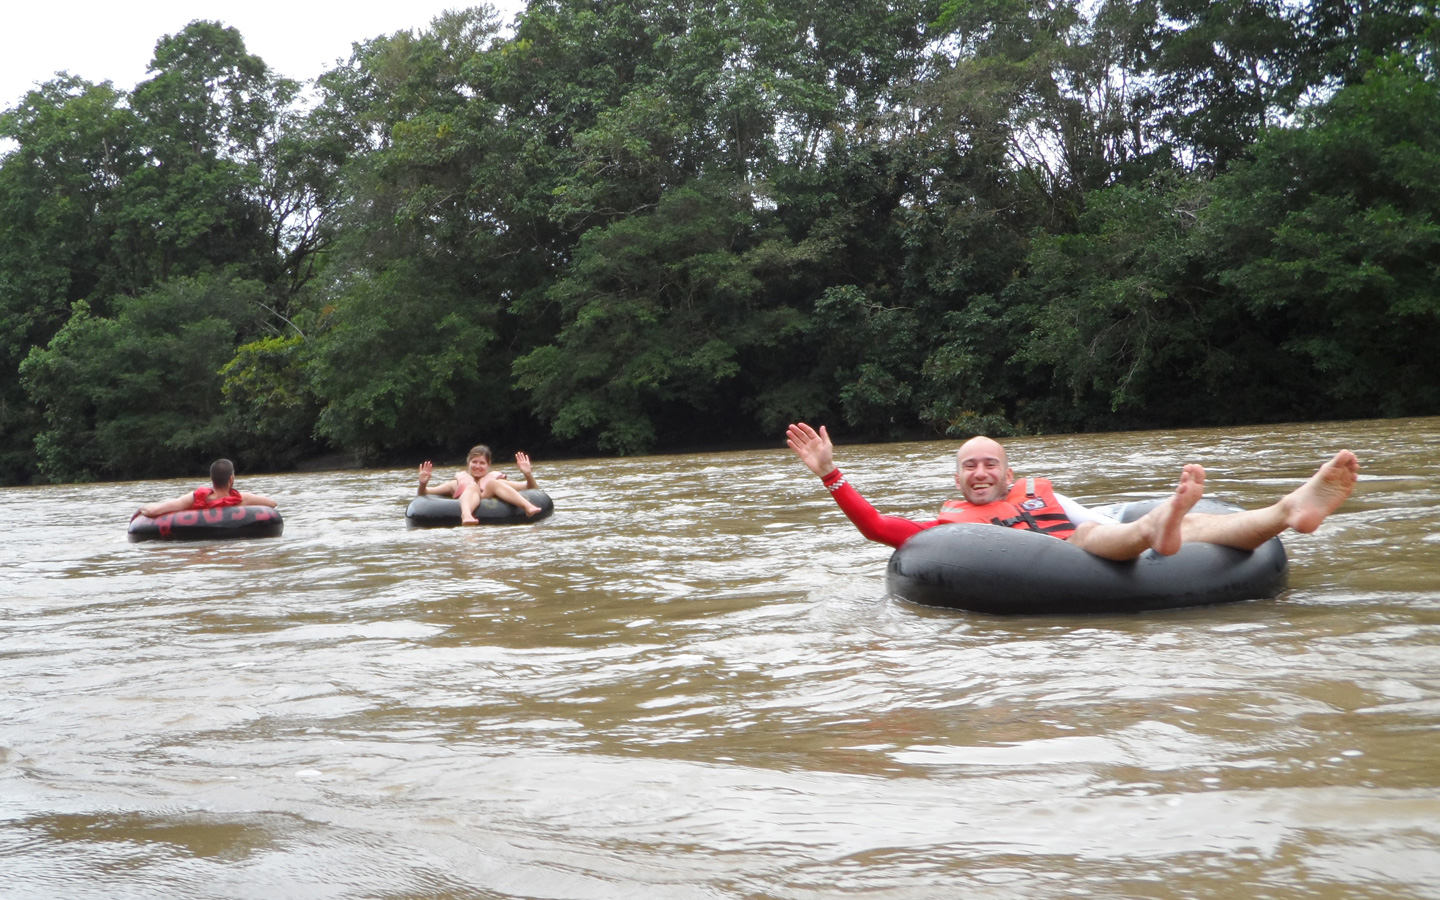 Two Spanish students waving during a tubing activity in Mindo